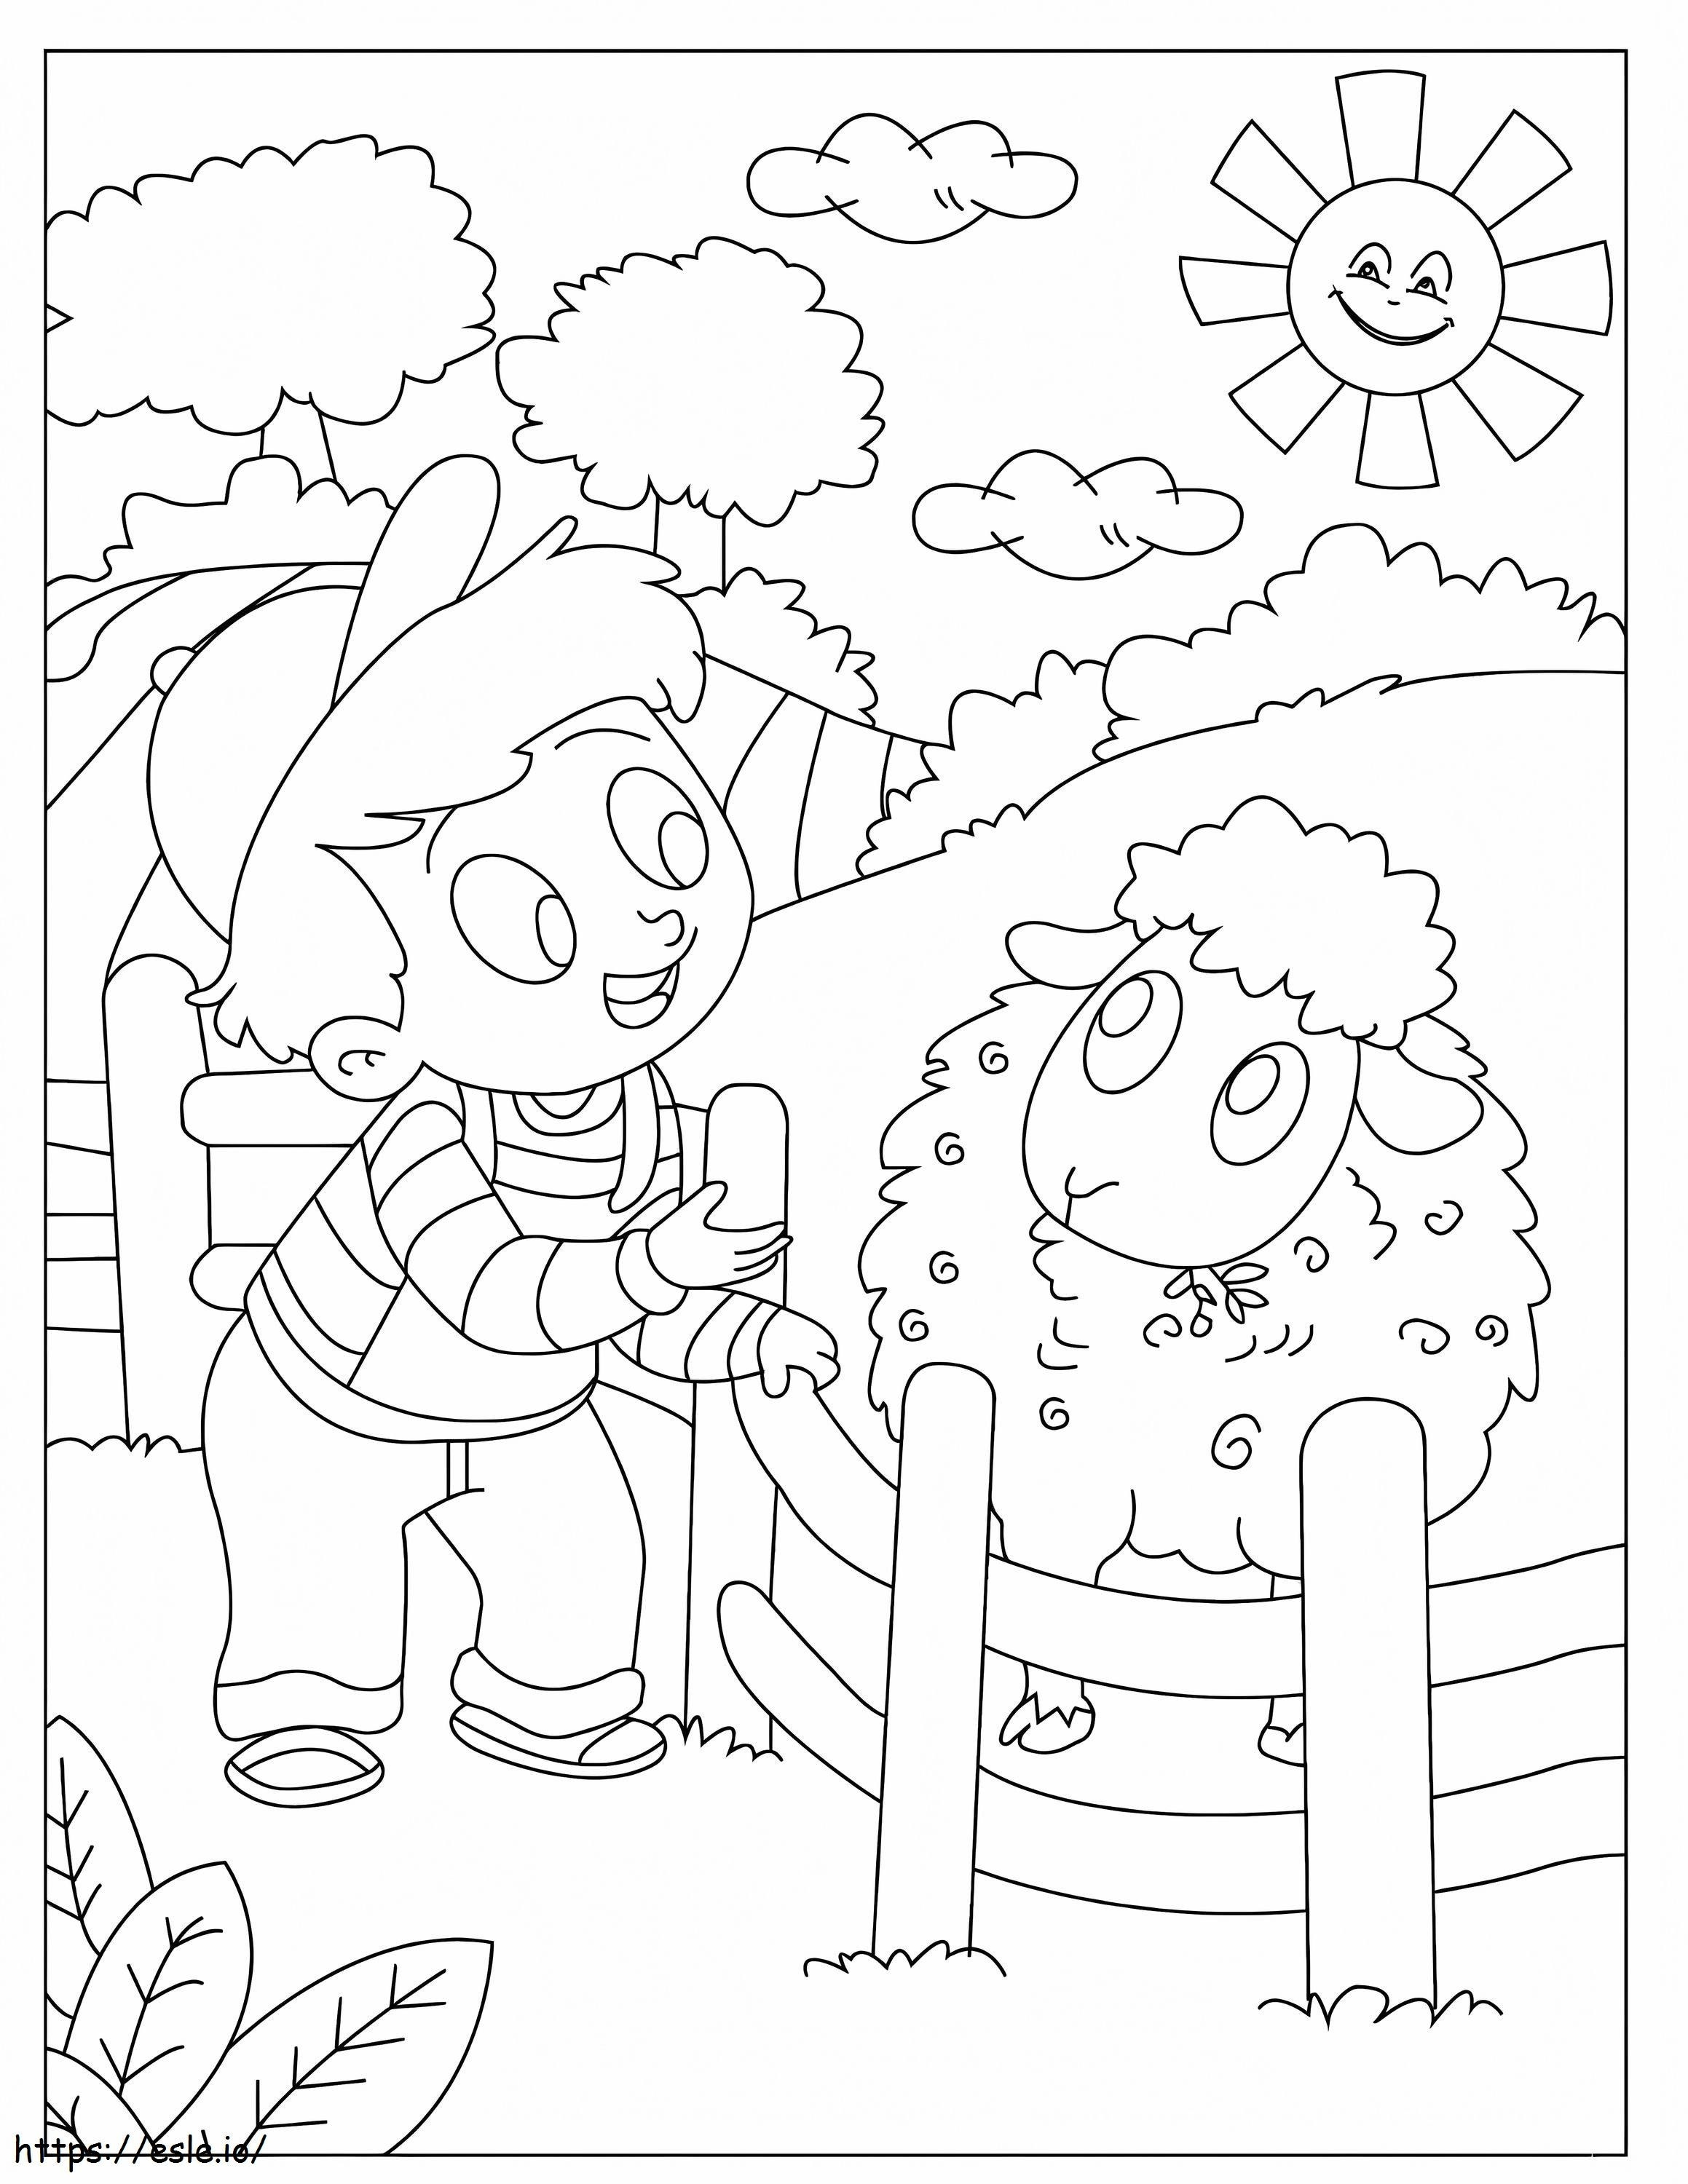 Funny Boy With Sheep coloring page